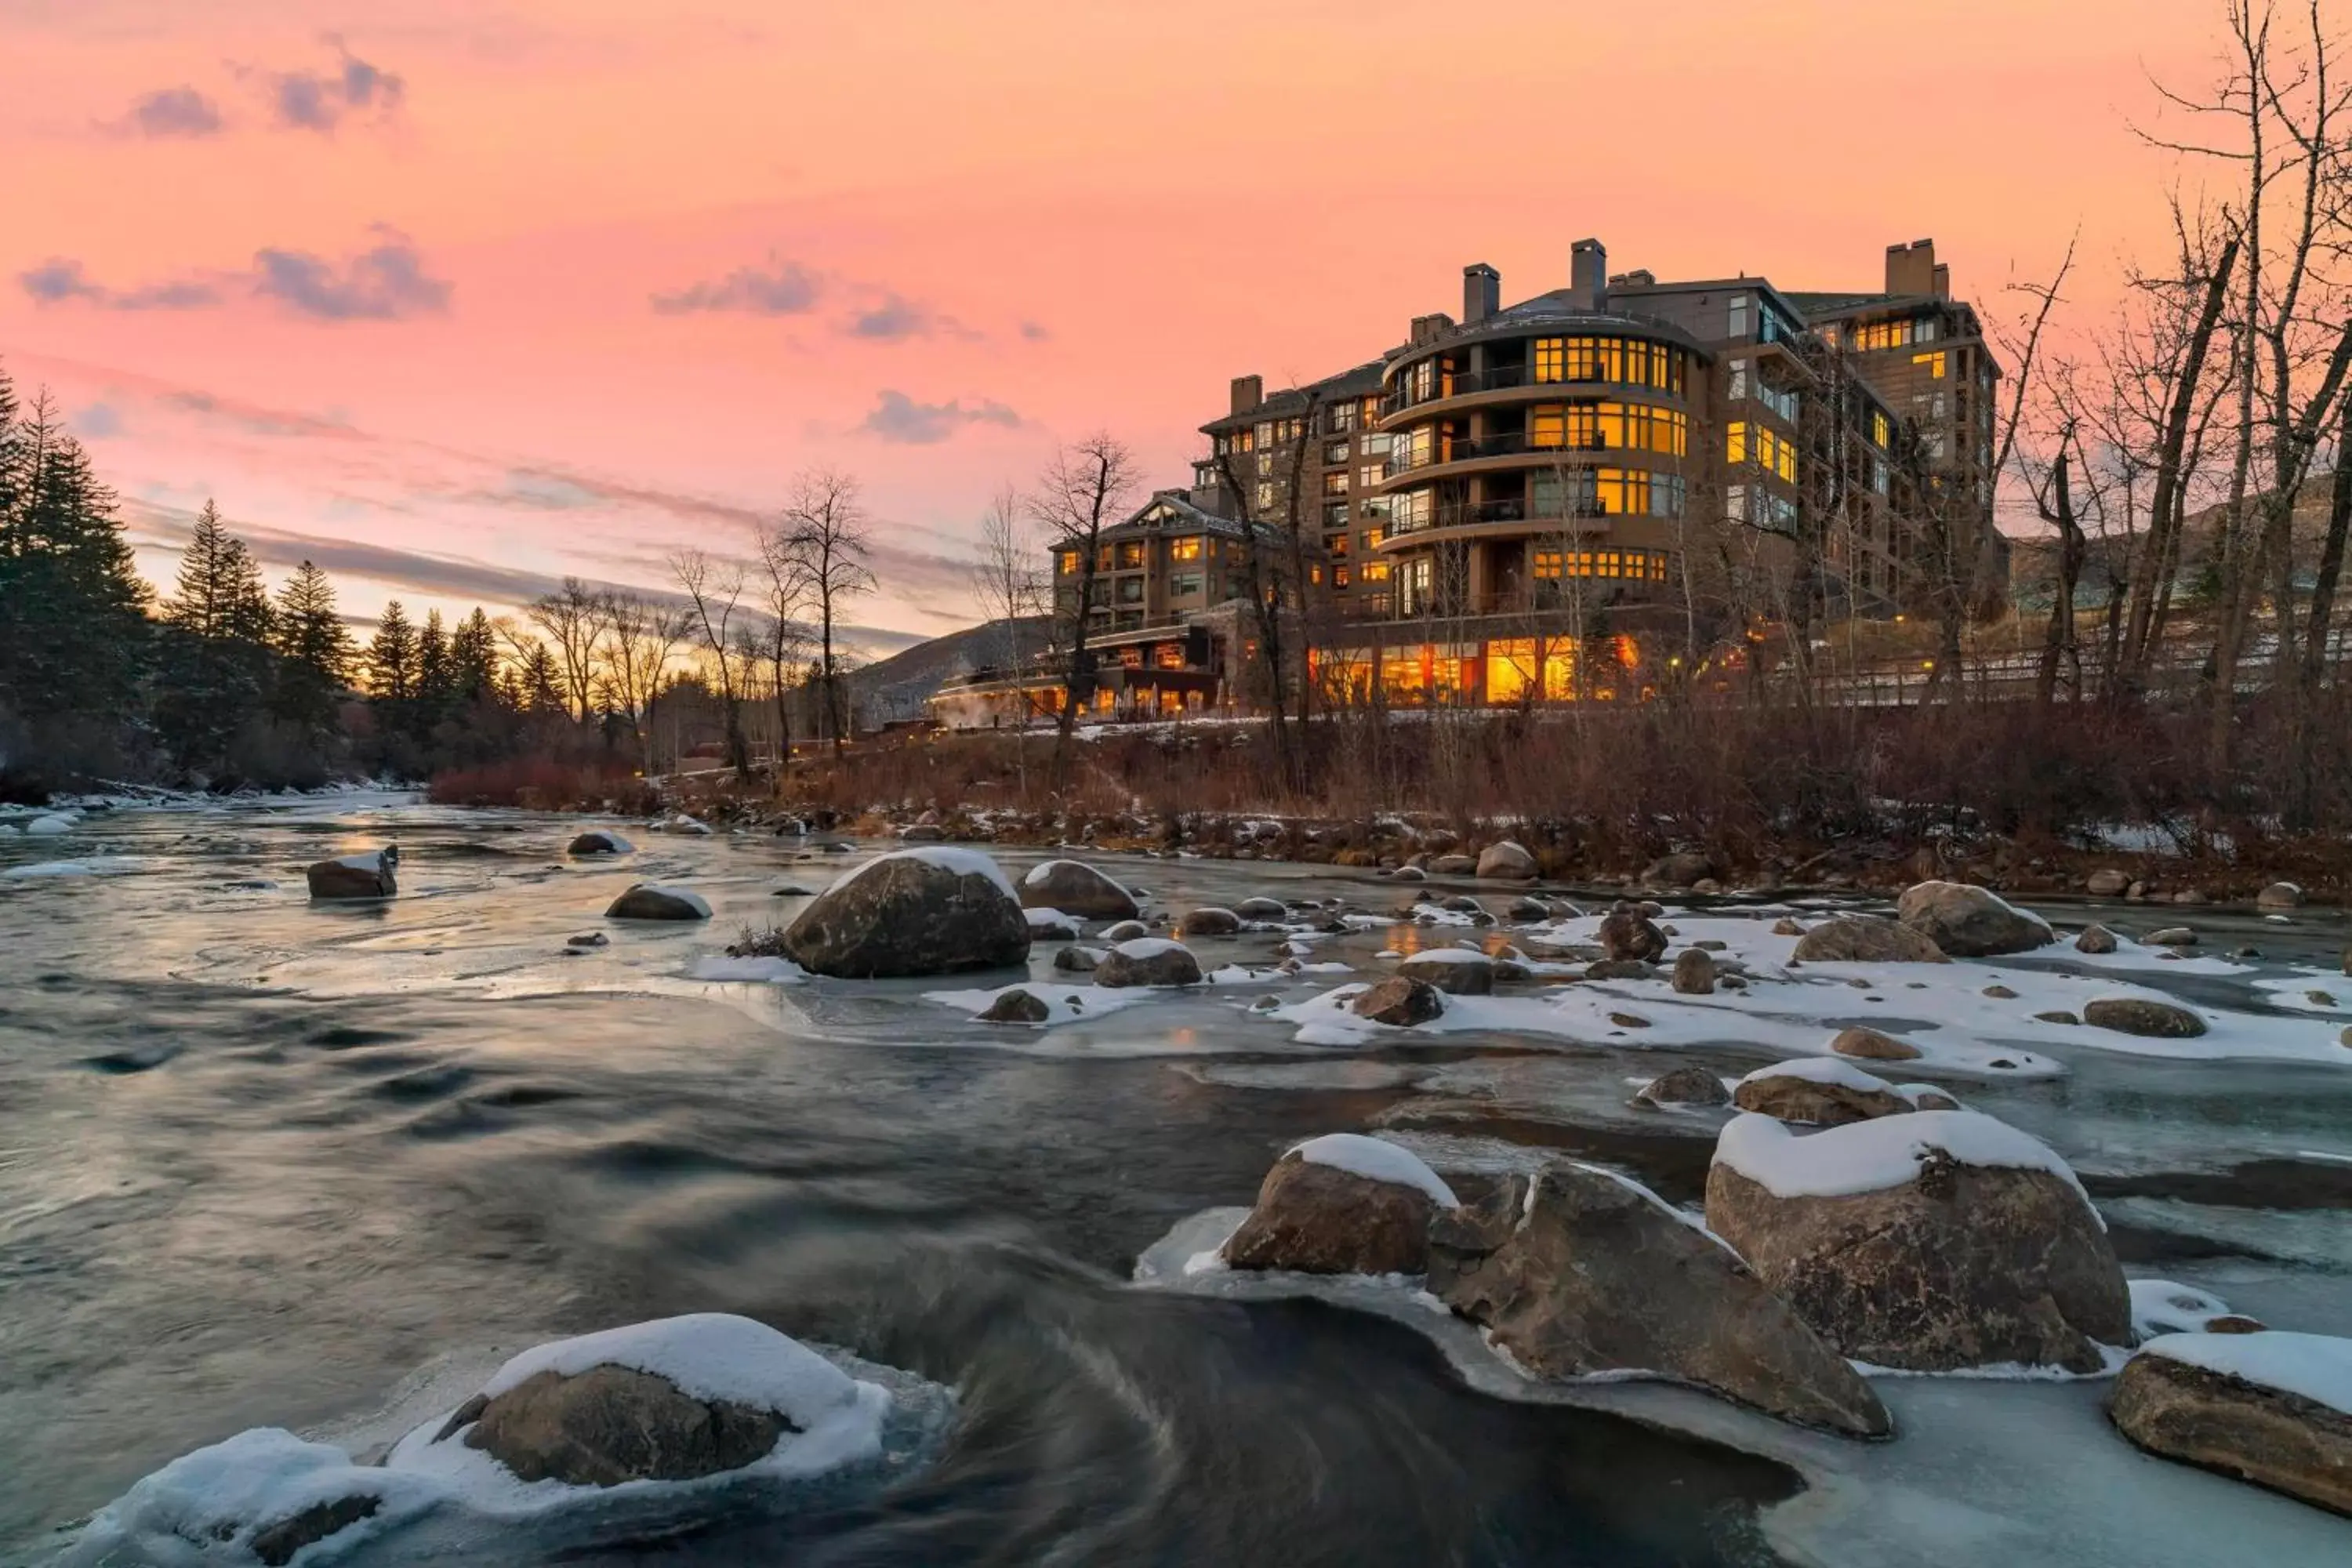 Property building, Winter in The Westin Riverfront Resort & Spa, Avon, Vail Valley